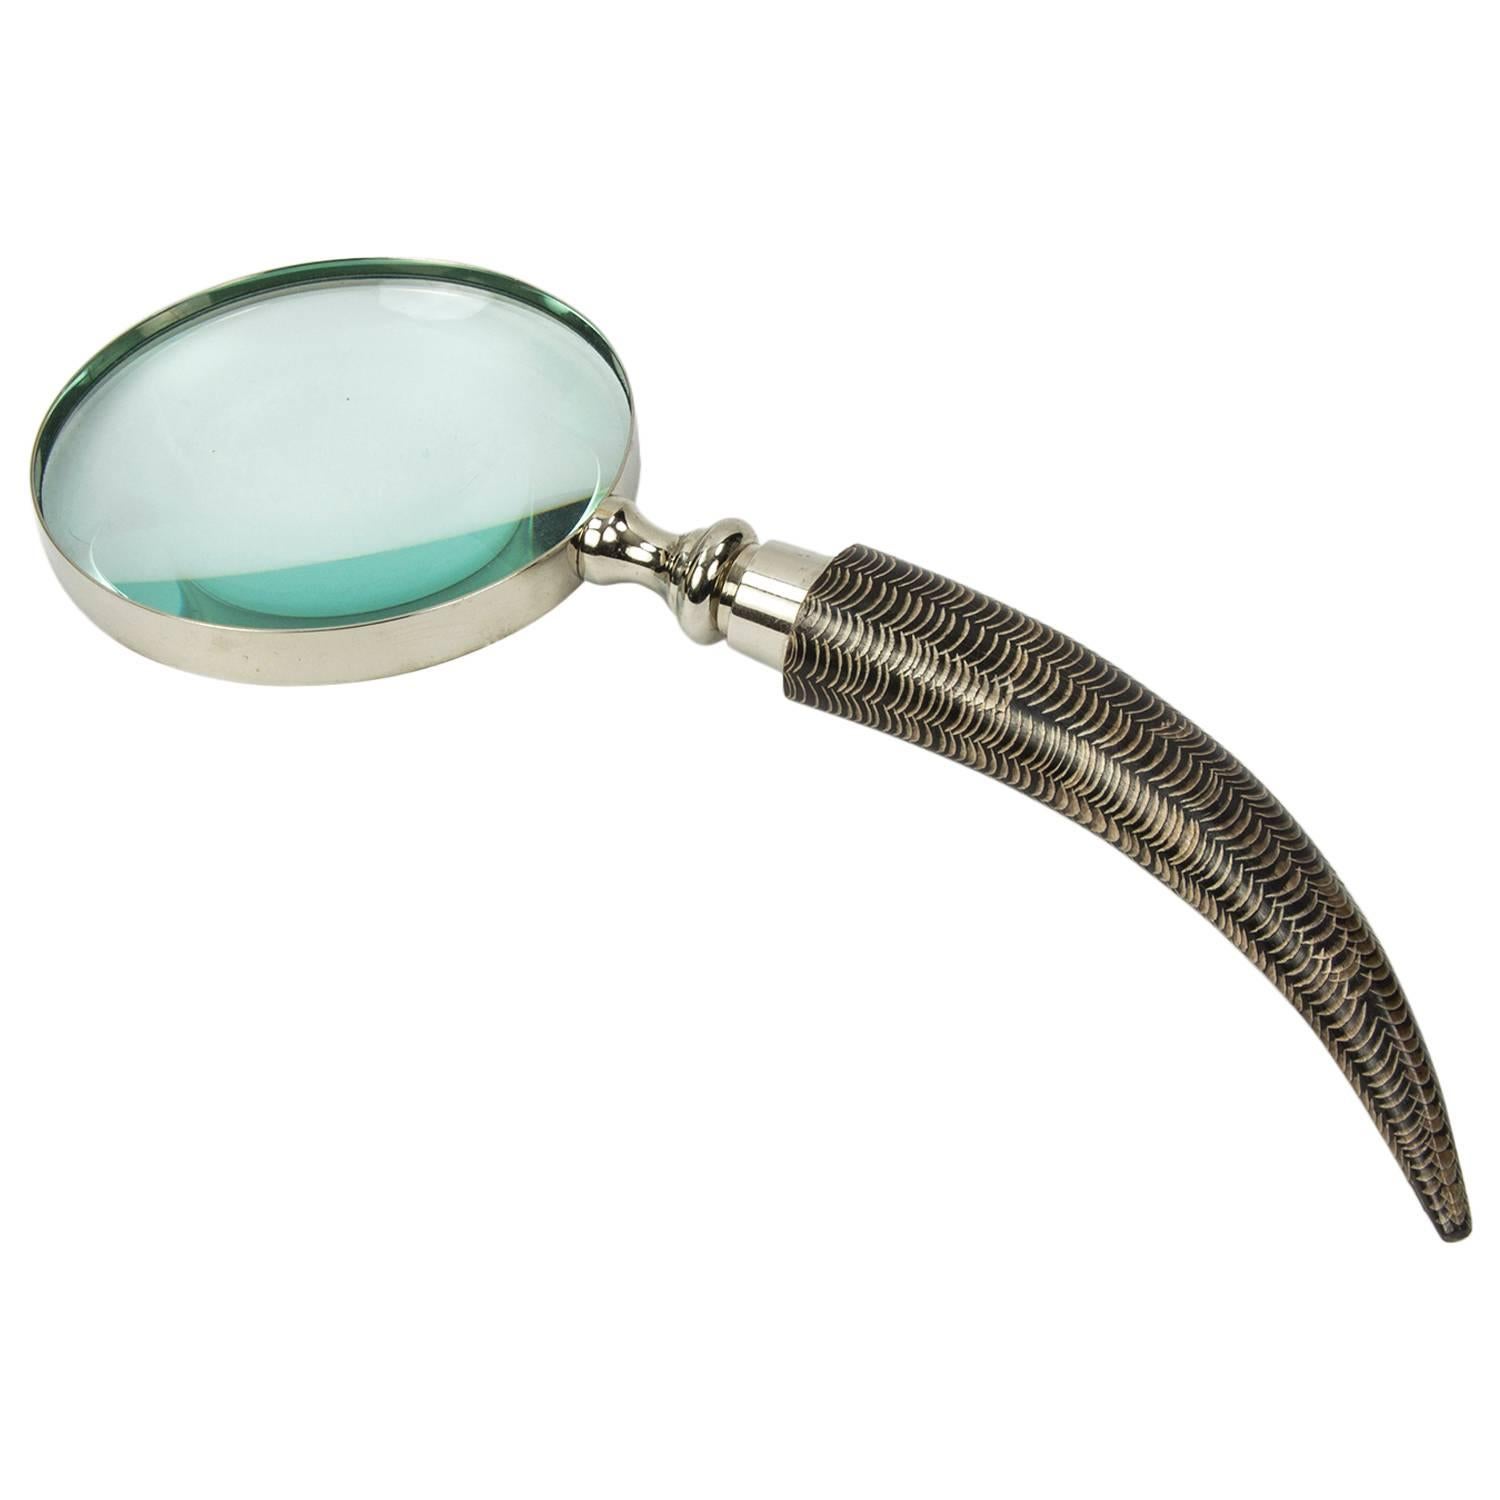 Magnifying Glass with Chrome and Curved Celluloid Handle